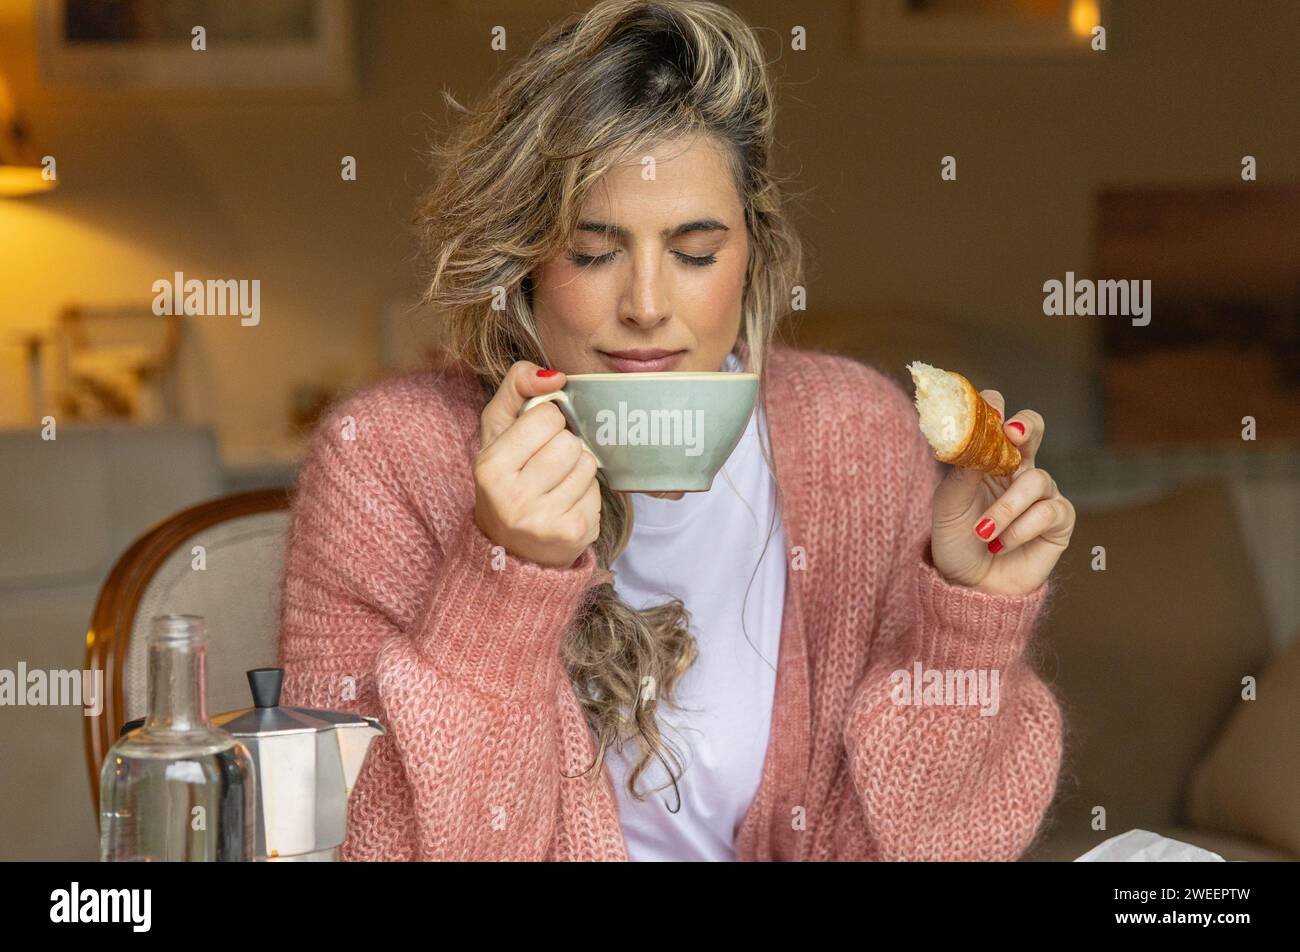 A contented young woman in a pink sweater savors the aroma of her coffee with eyes closed, holding a freshly bitten croissant. Stock Photo